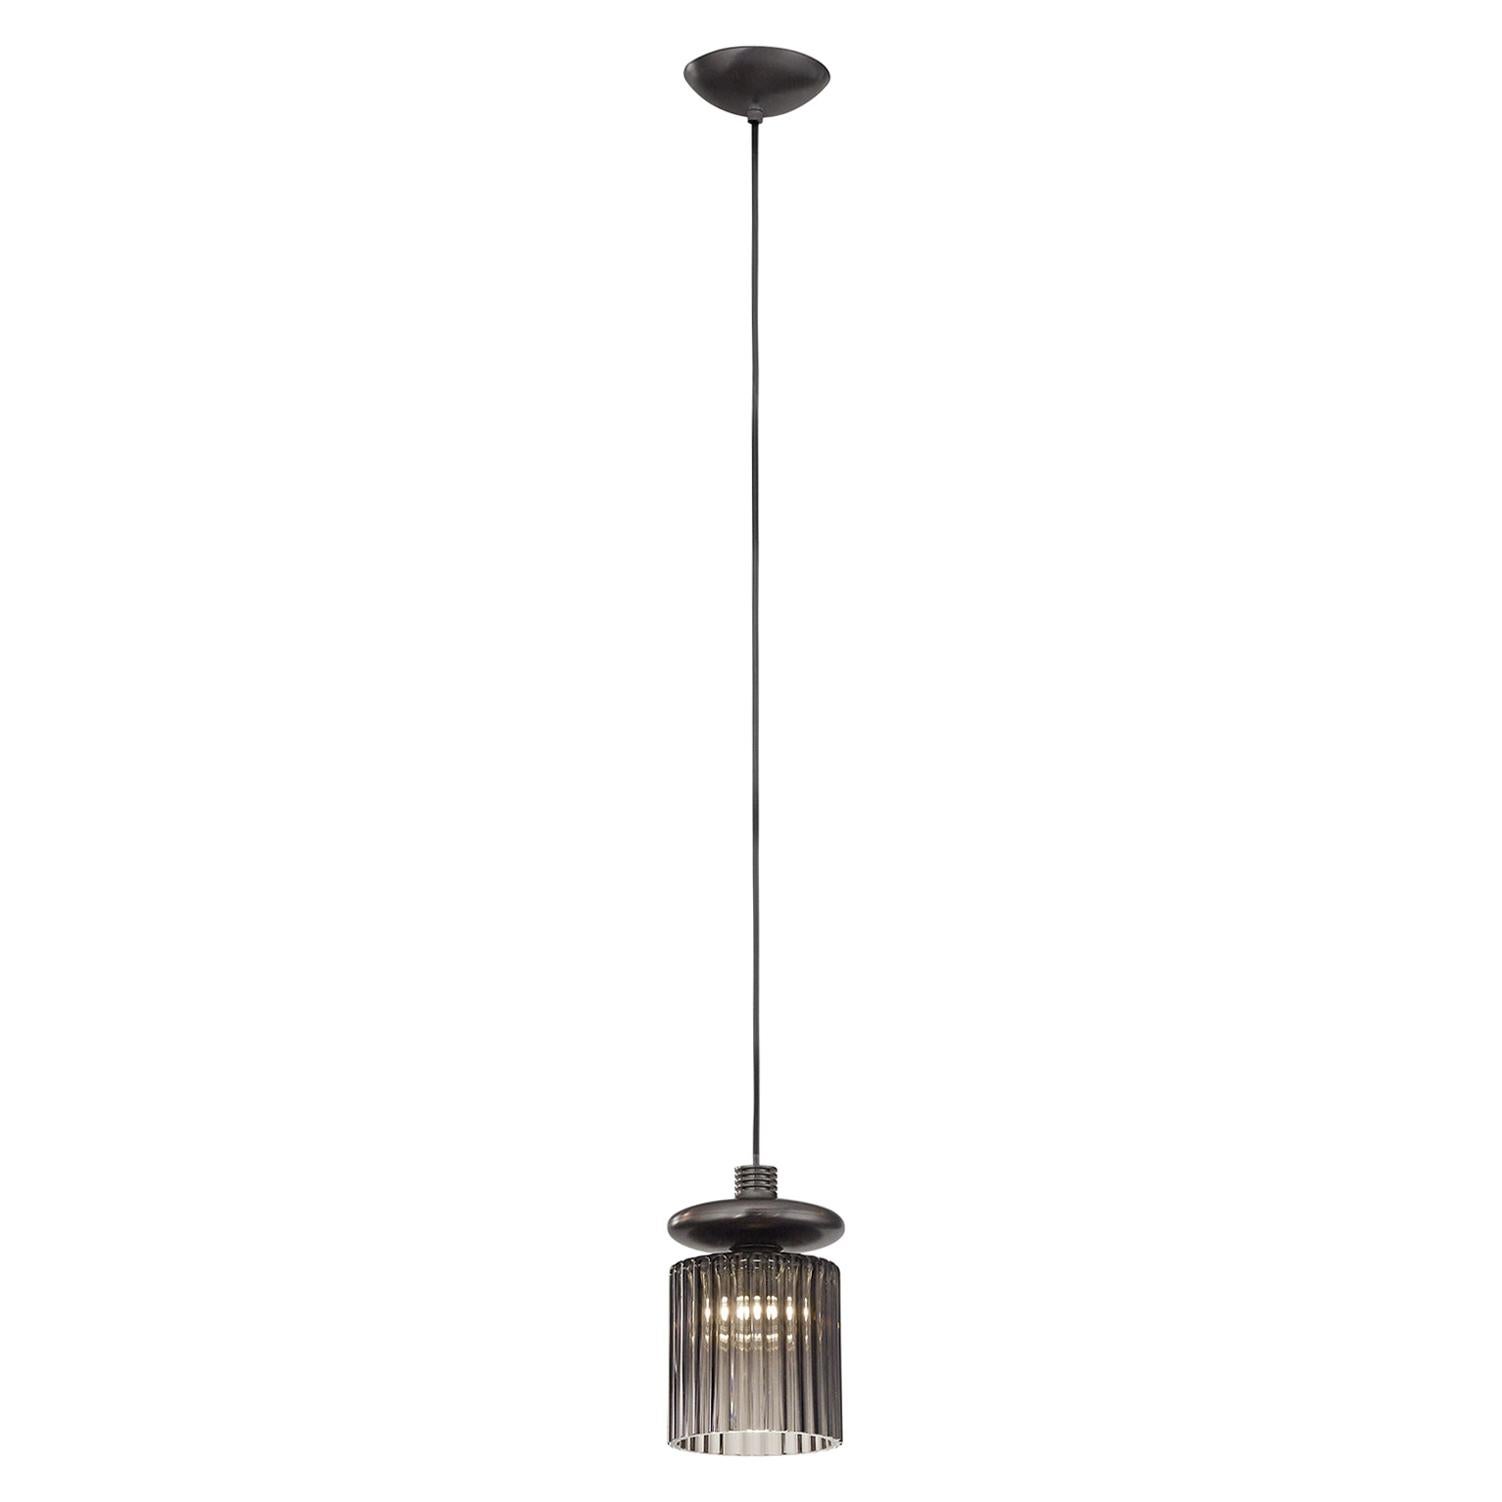 For Sale: Gray (Smoky and Transparent) Vistosi LED Tread SP Suspension Light with Bronze Frame by Chiaramonte & Marin